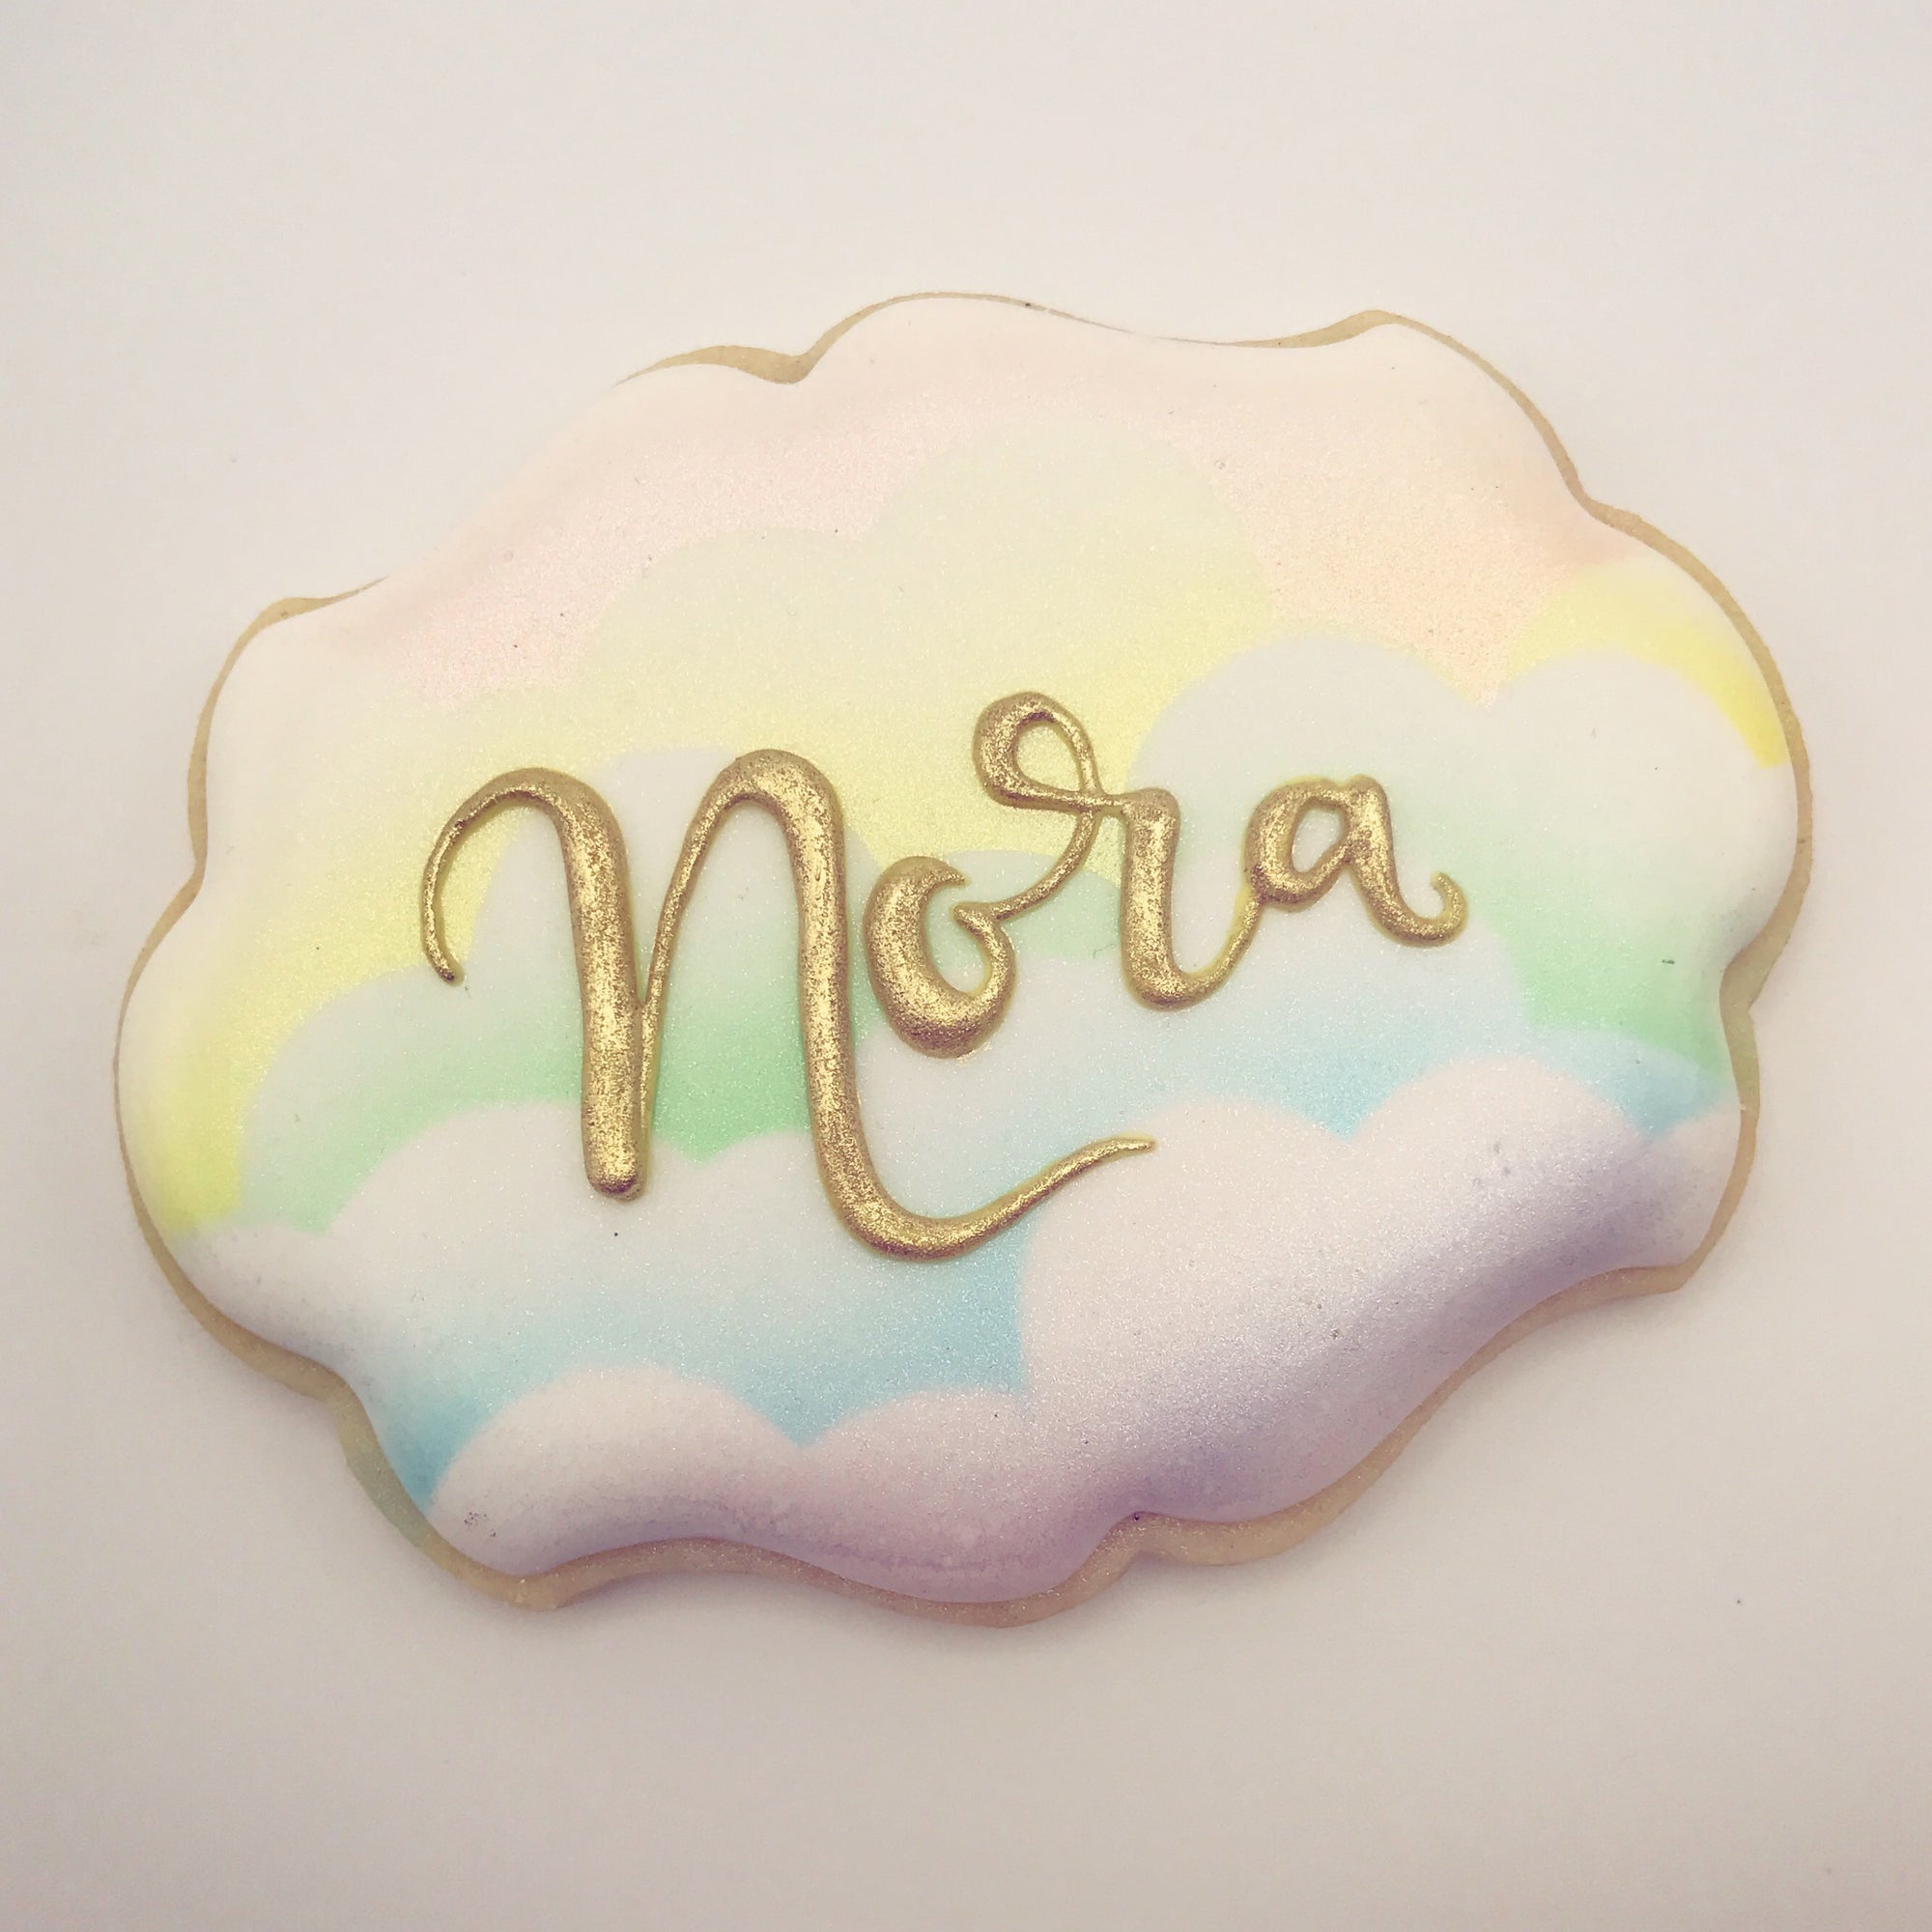 The Nora Plaque Cookie Cutter